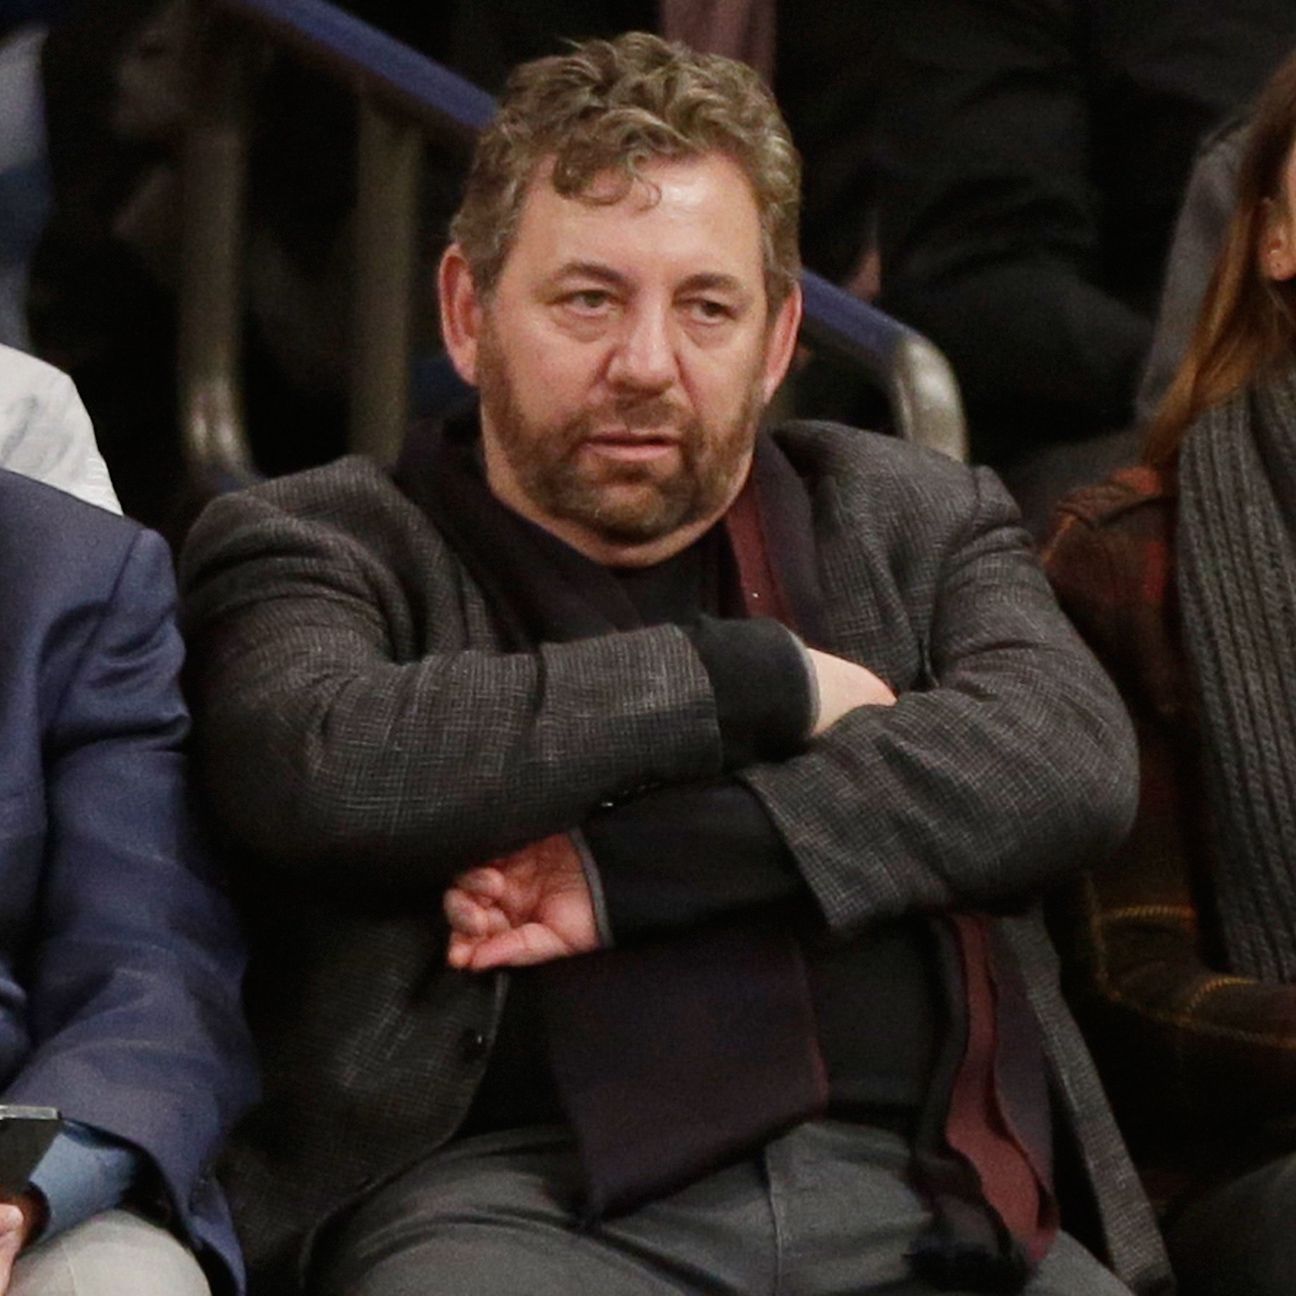 New York Knicks owner James Dolan to upset fan Root for Brooklyn Nets